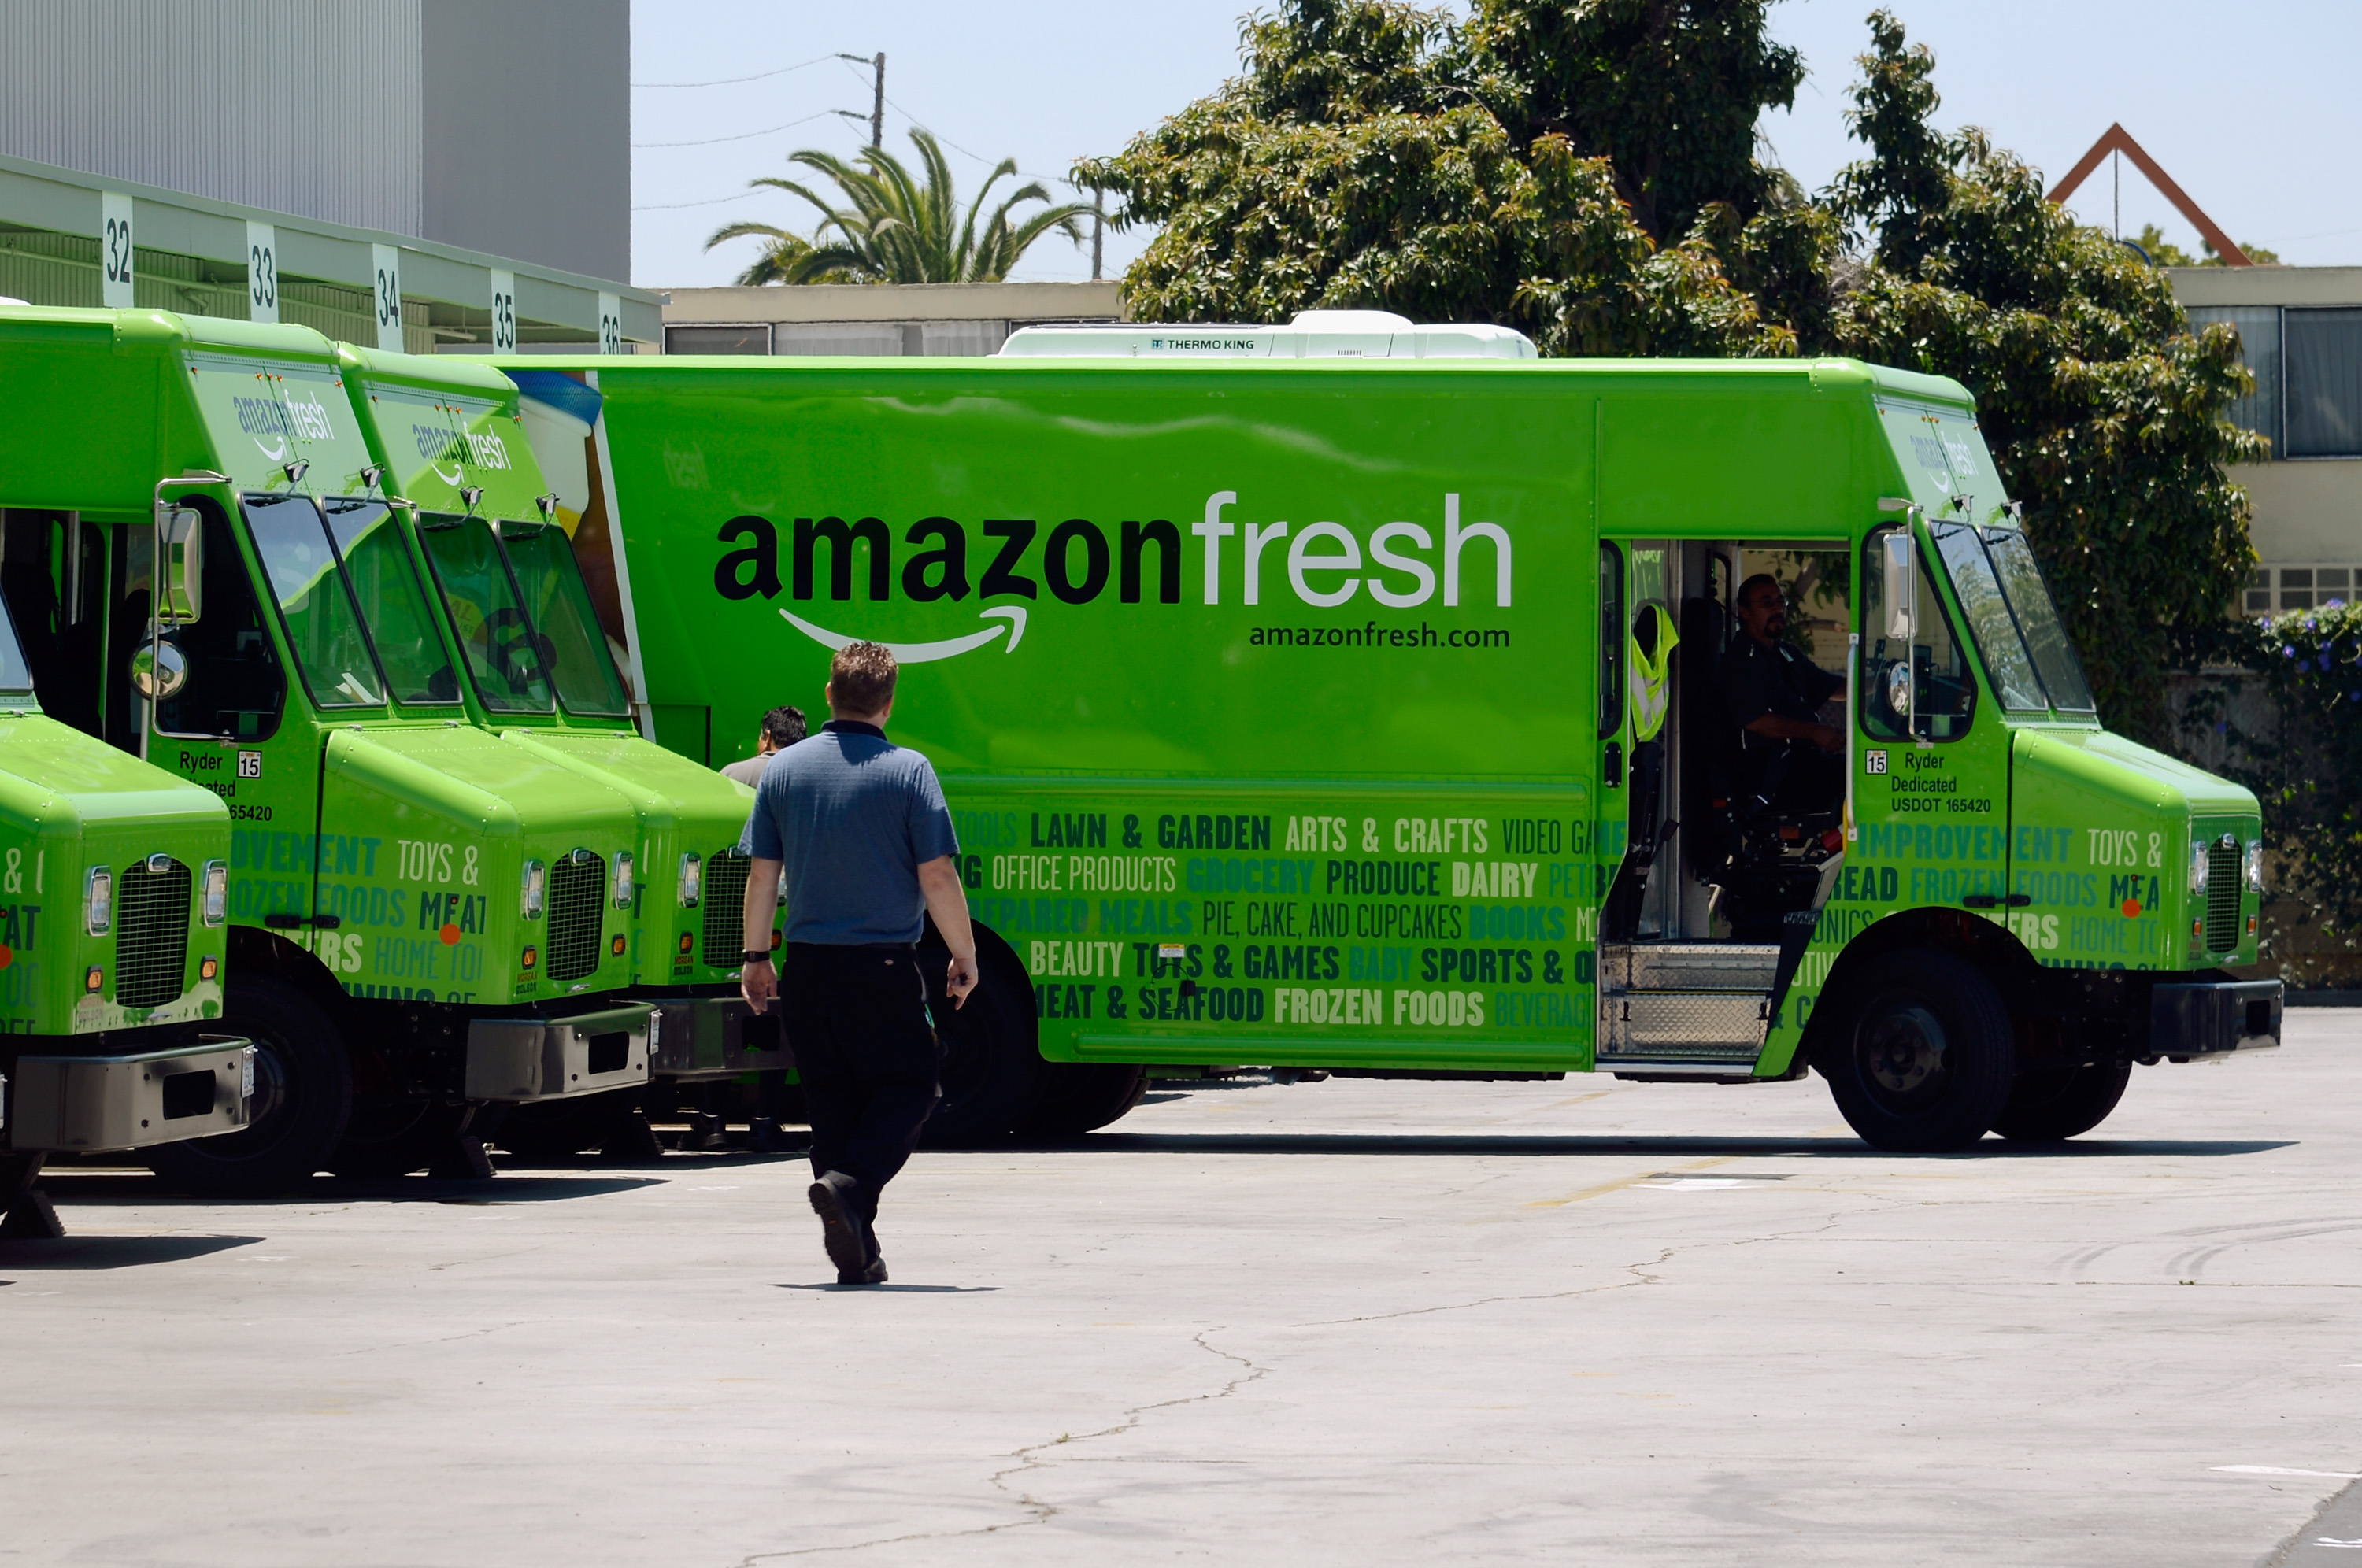 An Amazon Fresh truck arrives at a warehouse on June 27, 2013 in Inglewood, California. (Kevork Djansezian&amp;mdash;Getty Images)